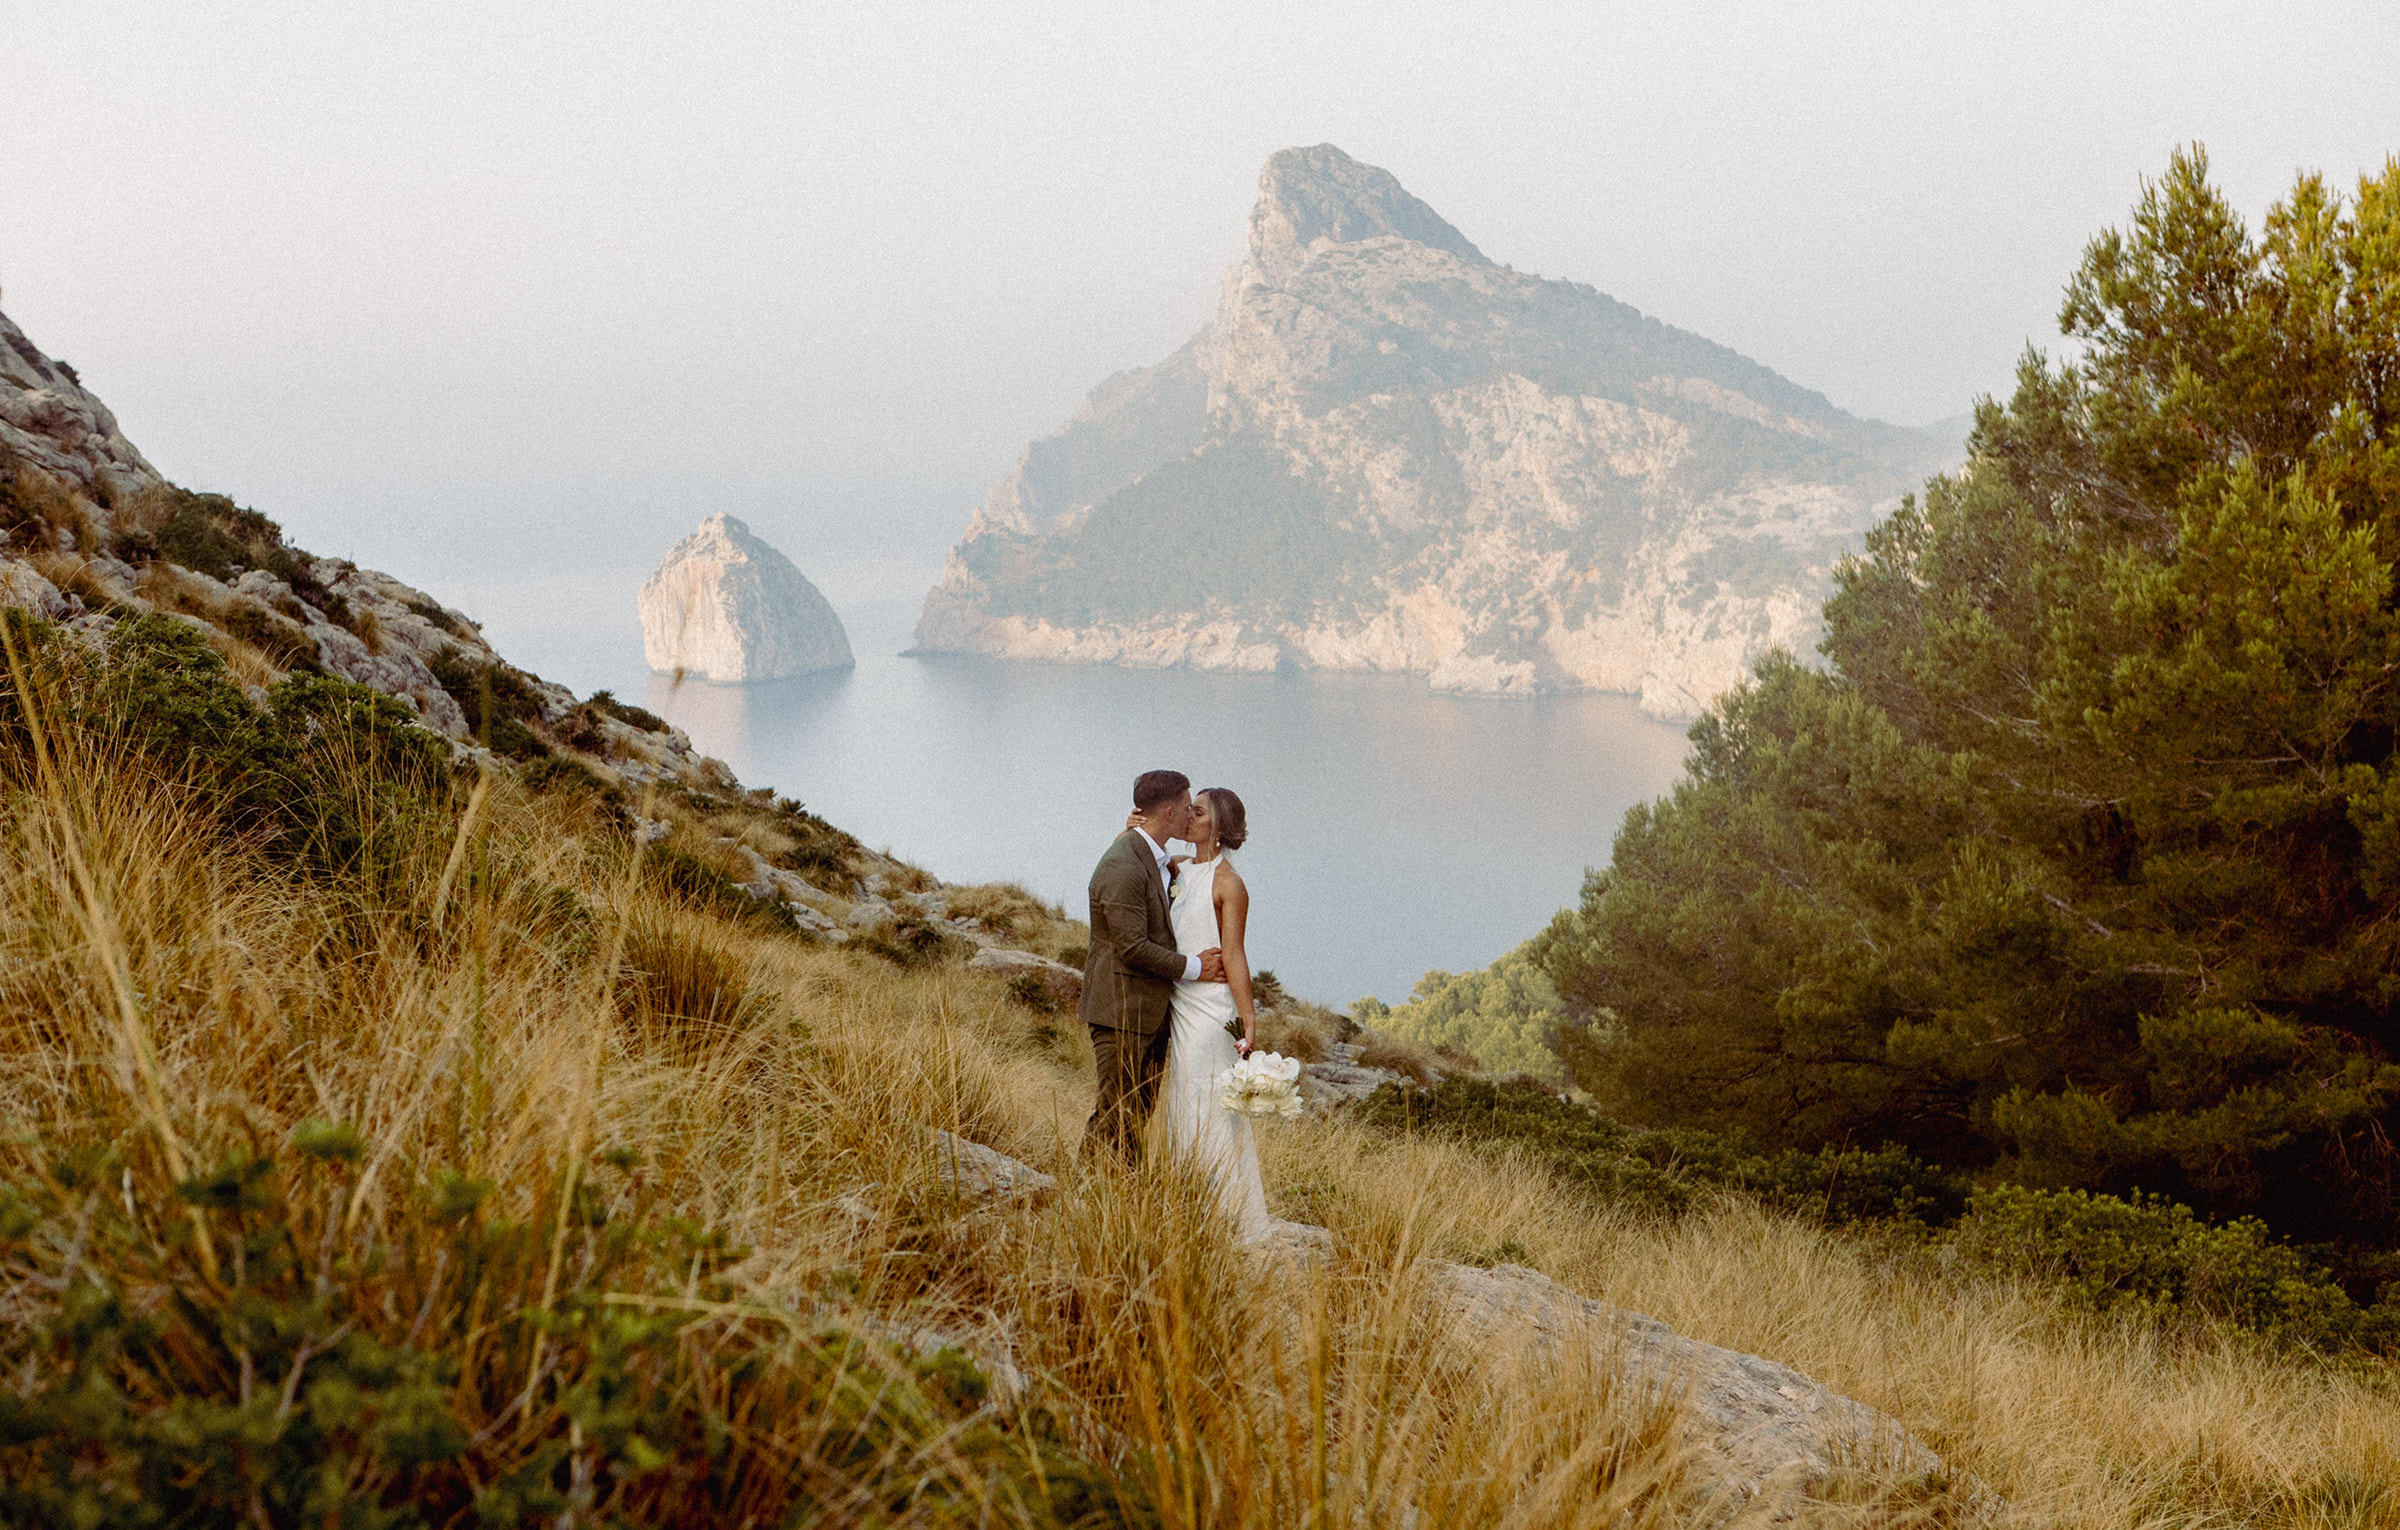 Couple who eloped in Mallorca Spain say vows 